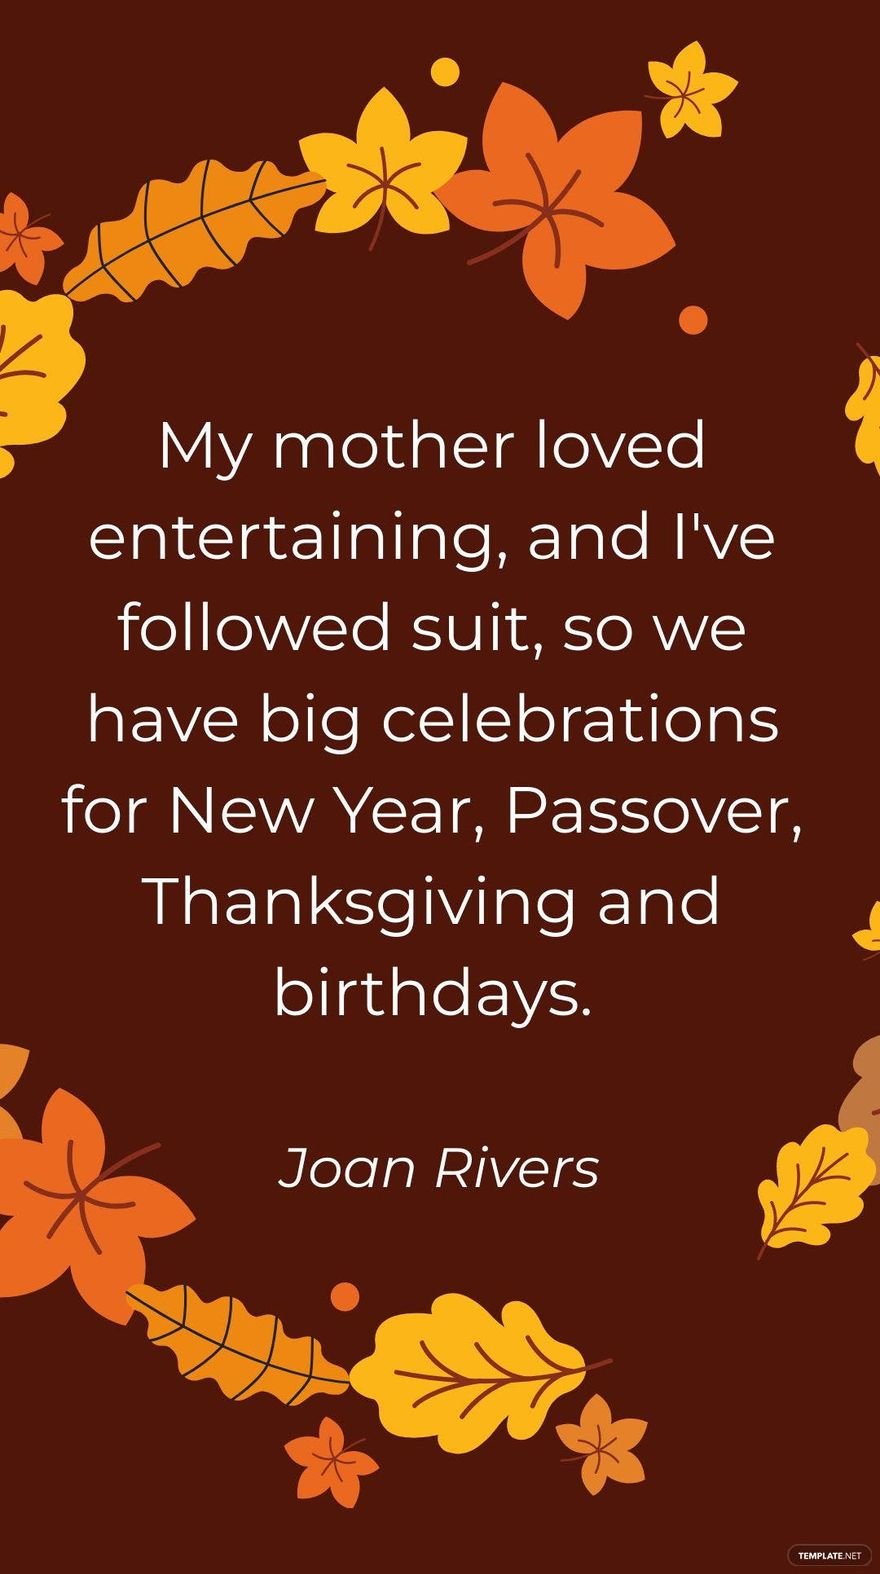 Joan Rivers - My mother loved entertaining, and I've followed suit, so we have big celebrations for New Year, Passover, Thanksgiving and birthdays. in JPG